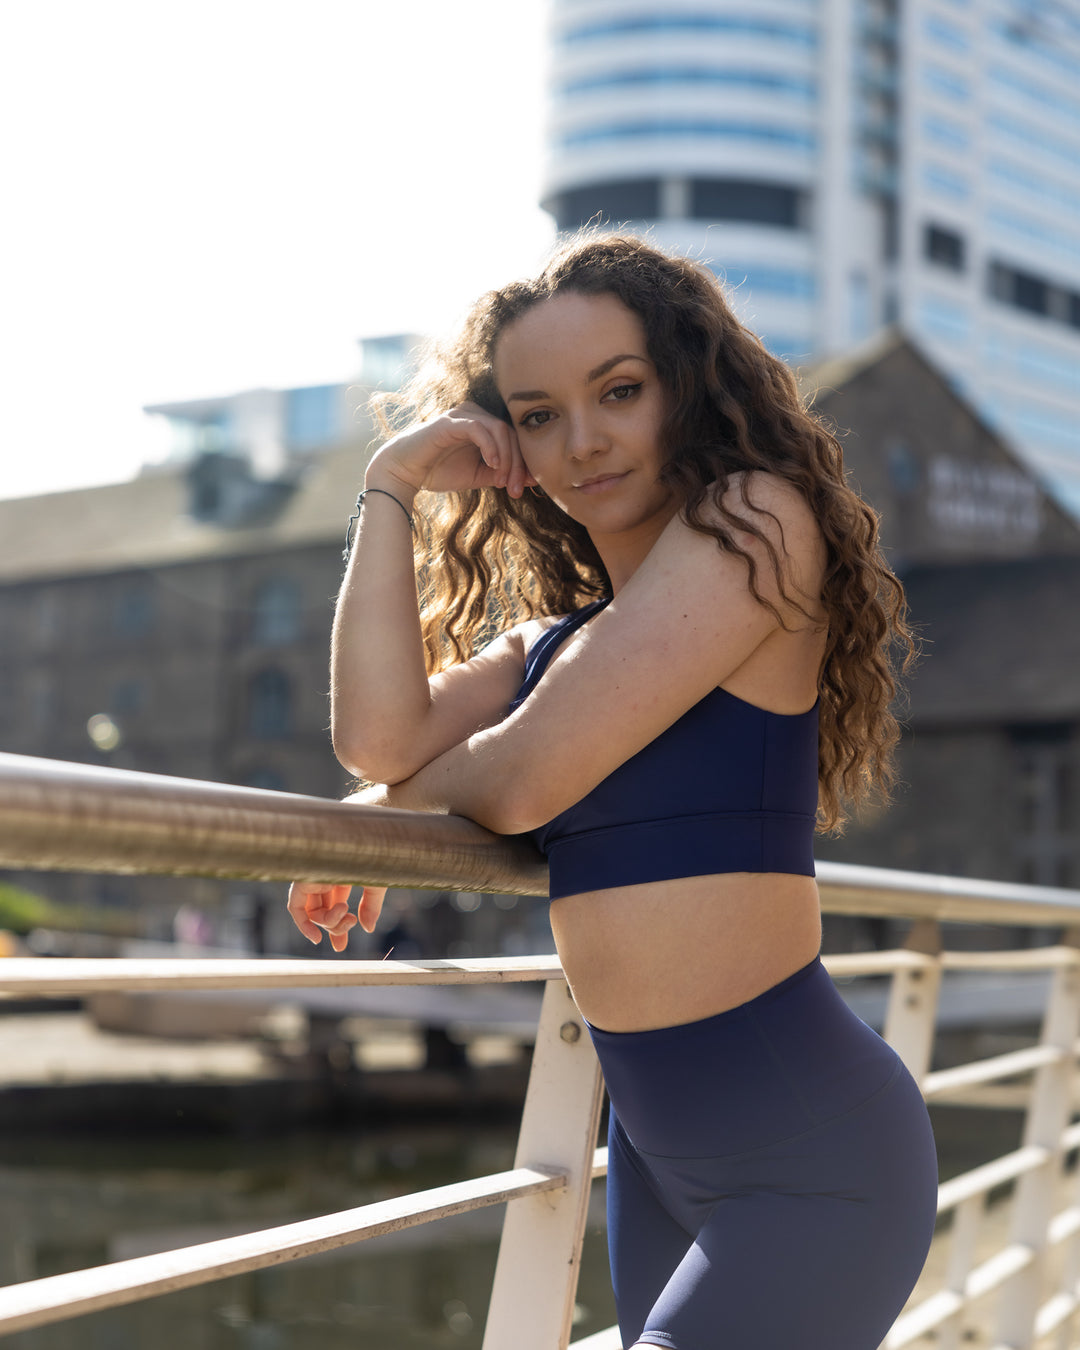 Becki Louise poses in DYNS activewear